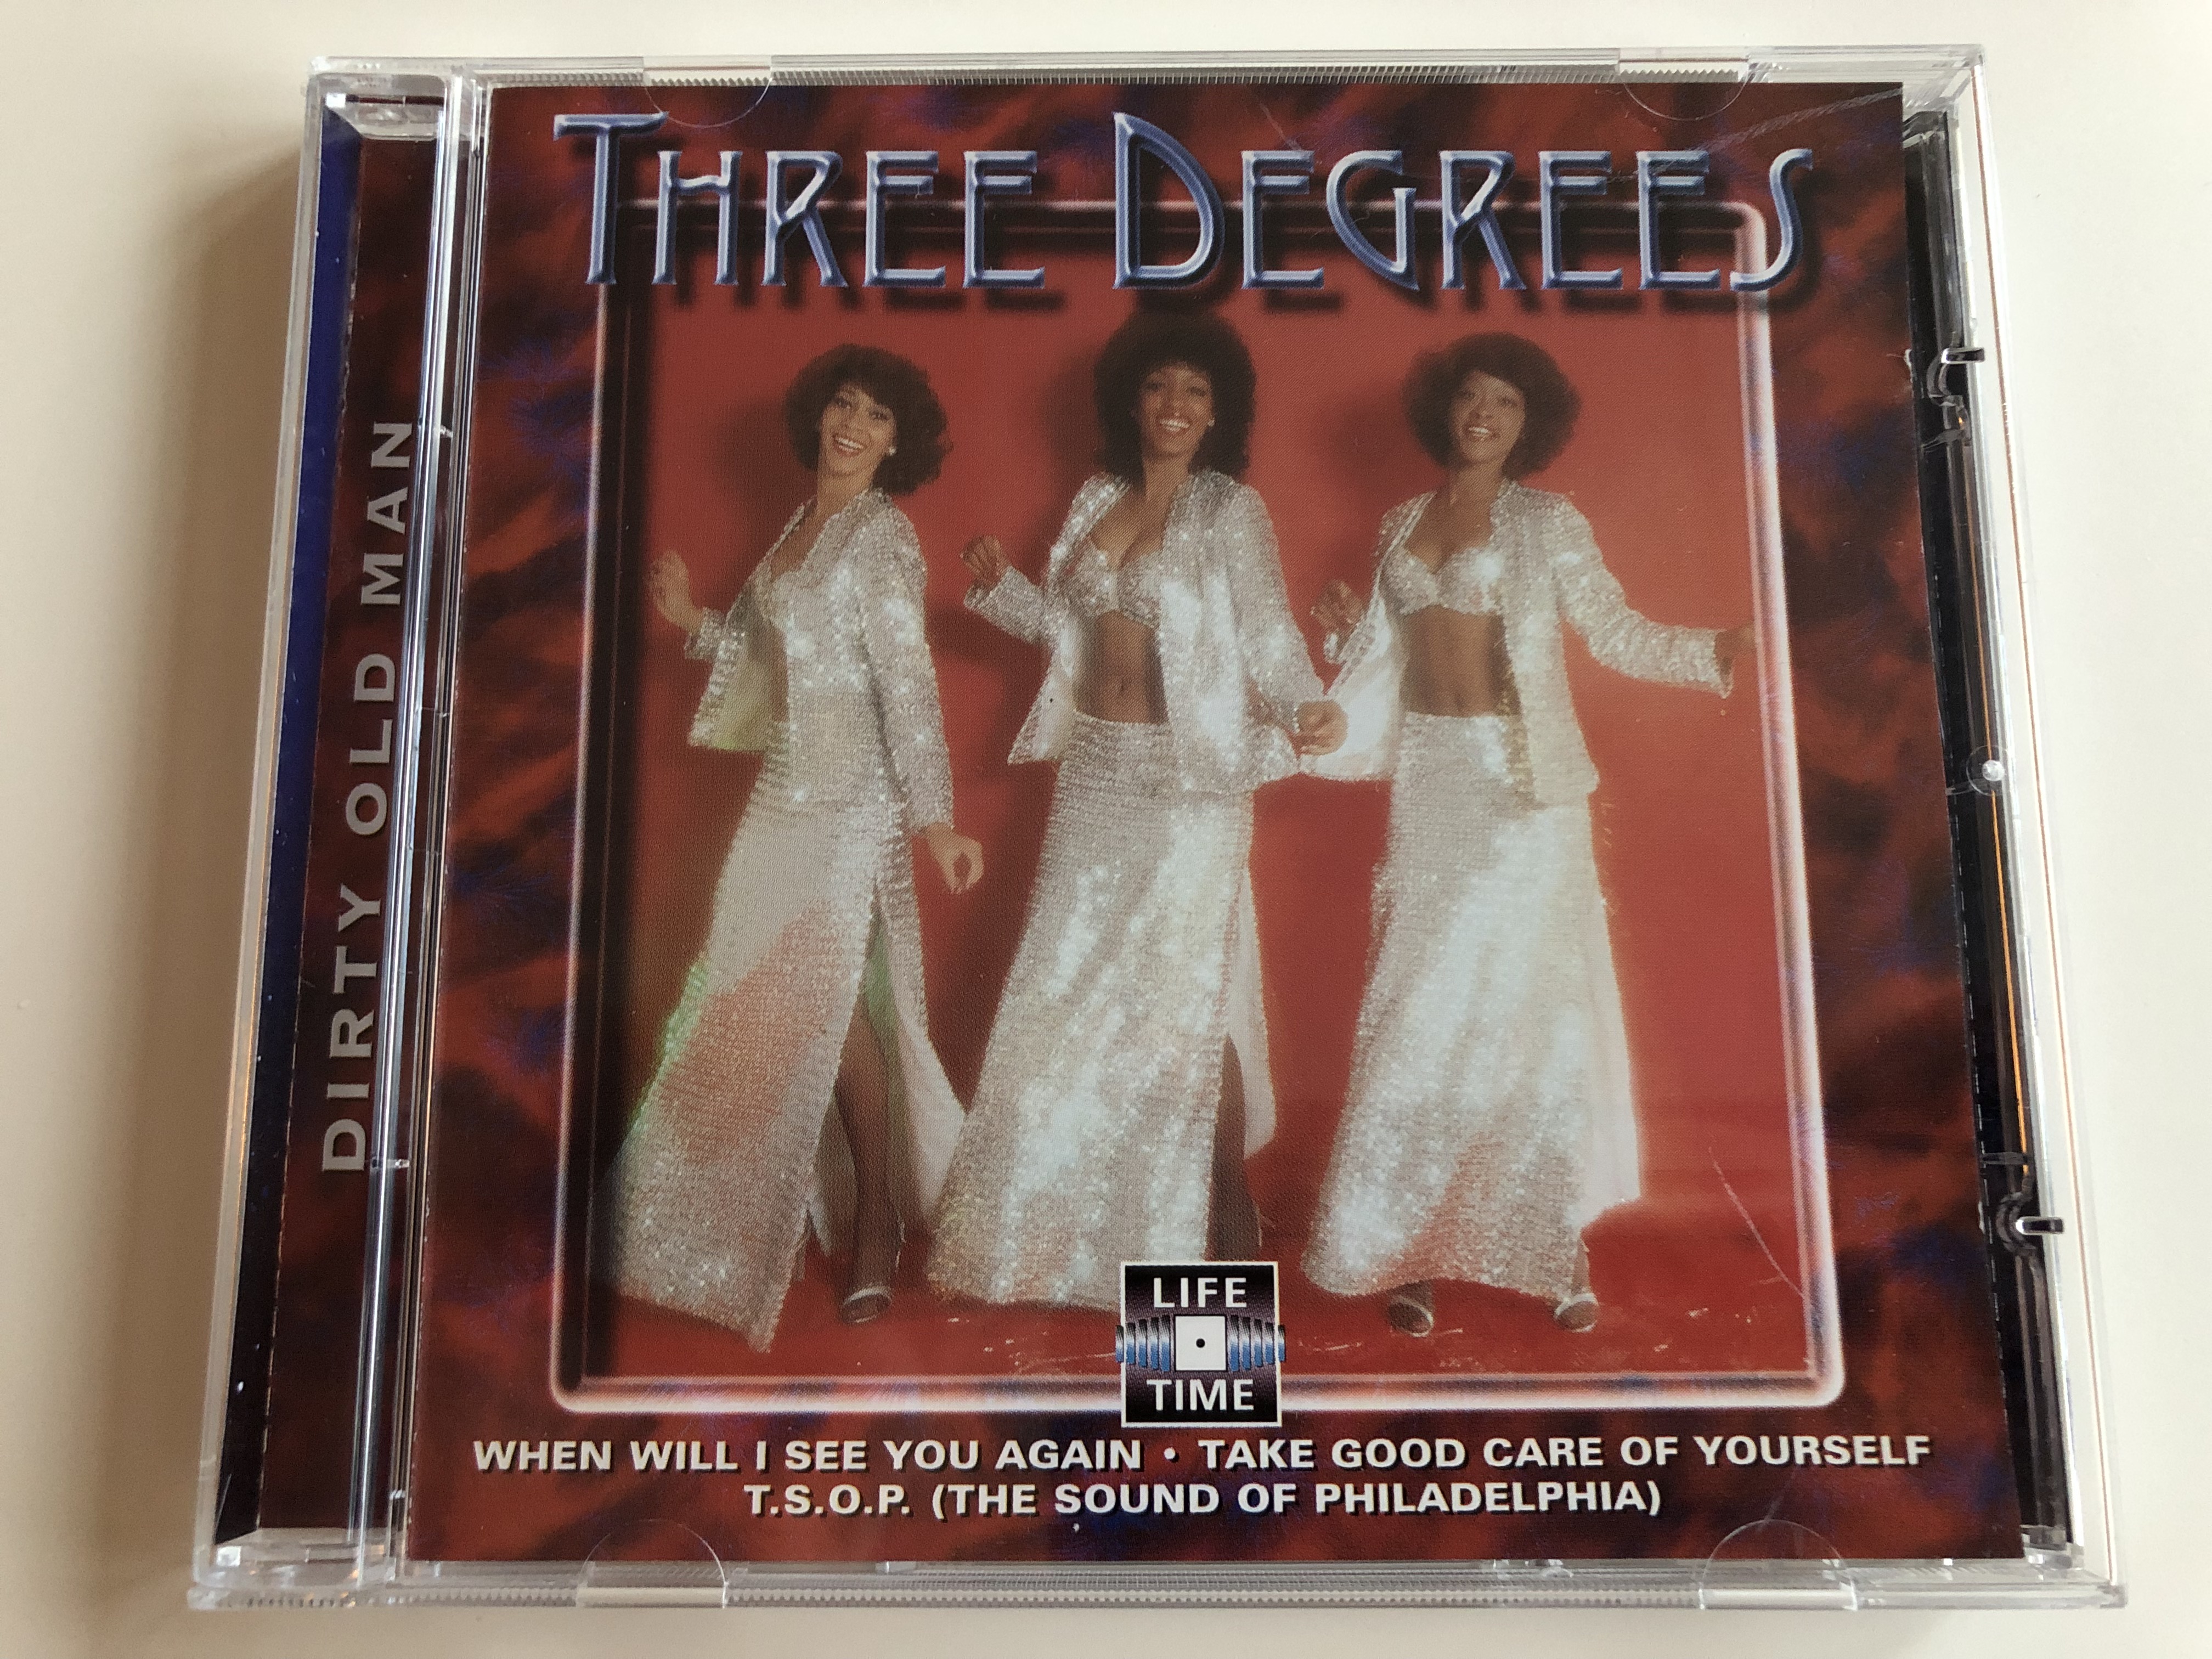 three-degrees-dirty-old-man-when-will-i-see-you-again-take-good-care-of-yourself-t.-s.-o.-p.-the-sound-of-philadelphia-life-time-audio-cd-lt-5081-1-.jpg